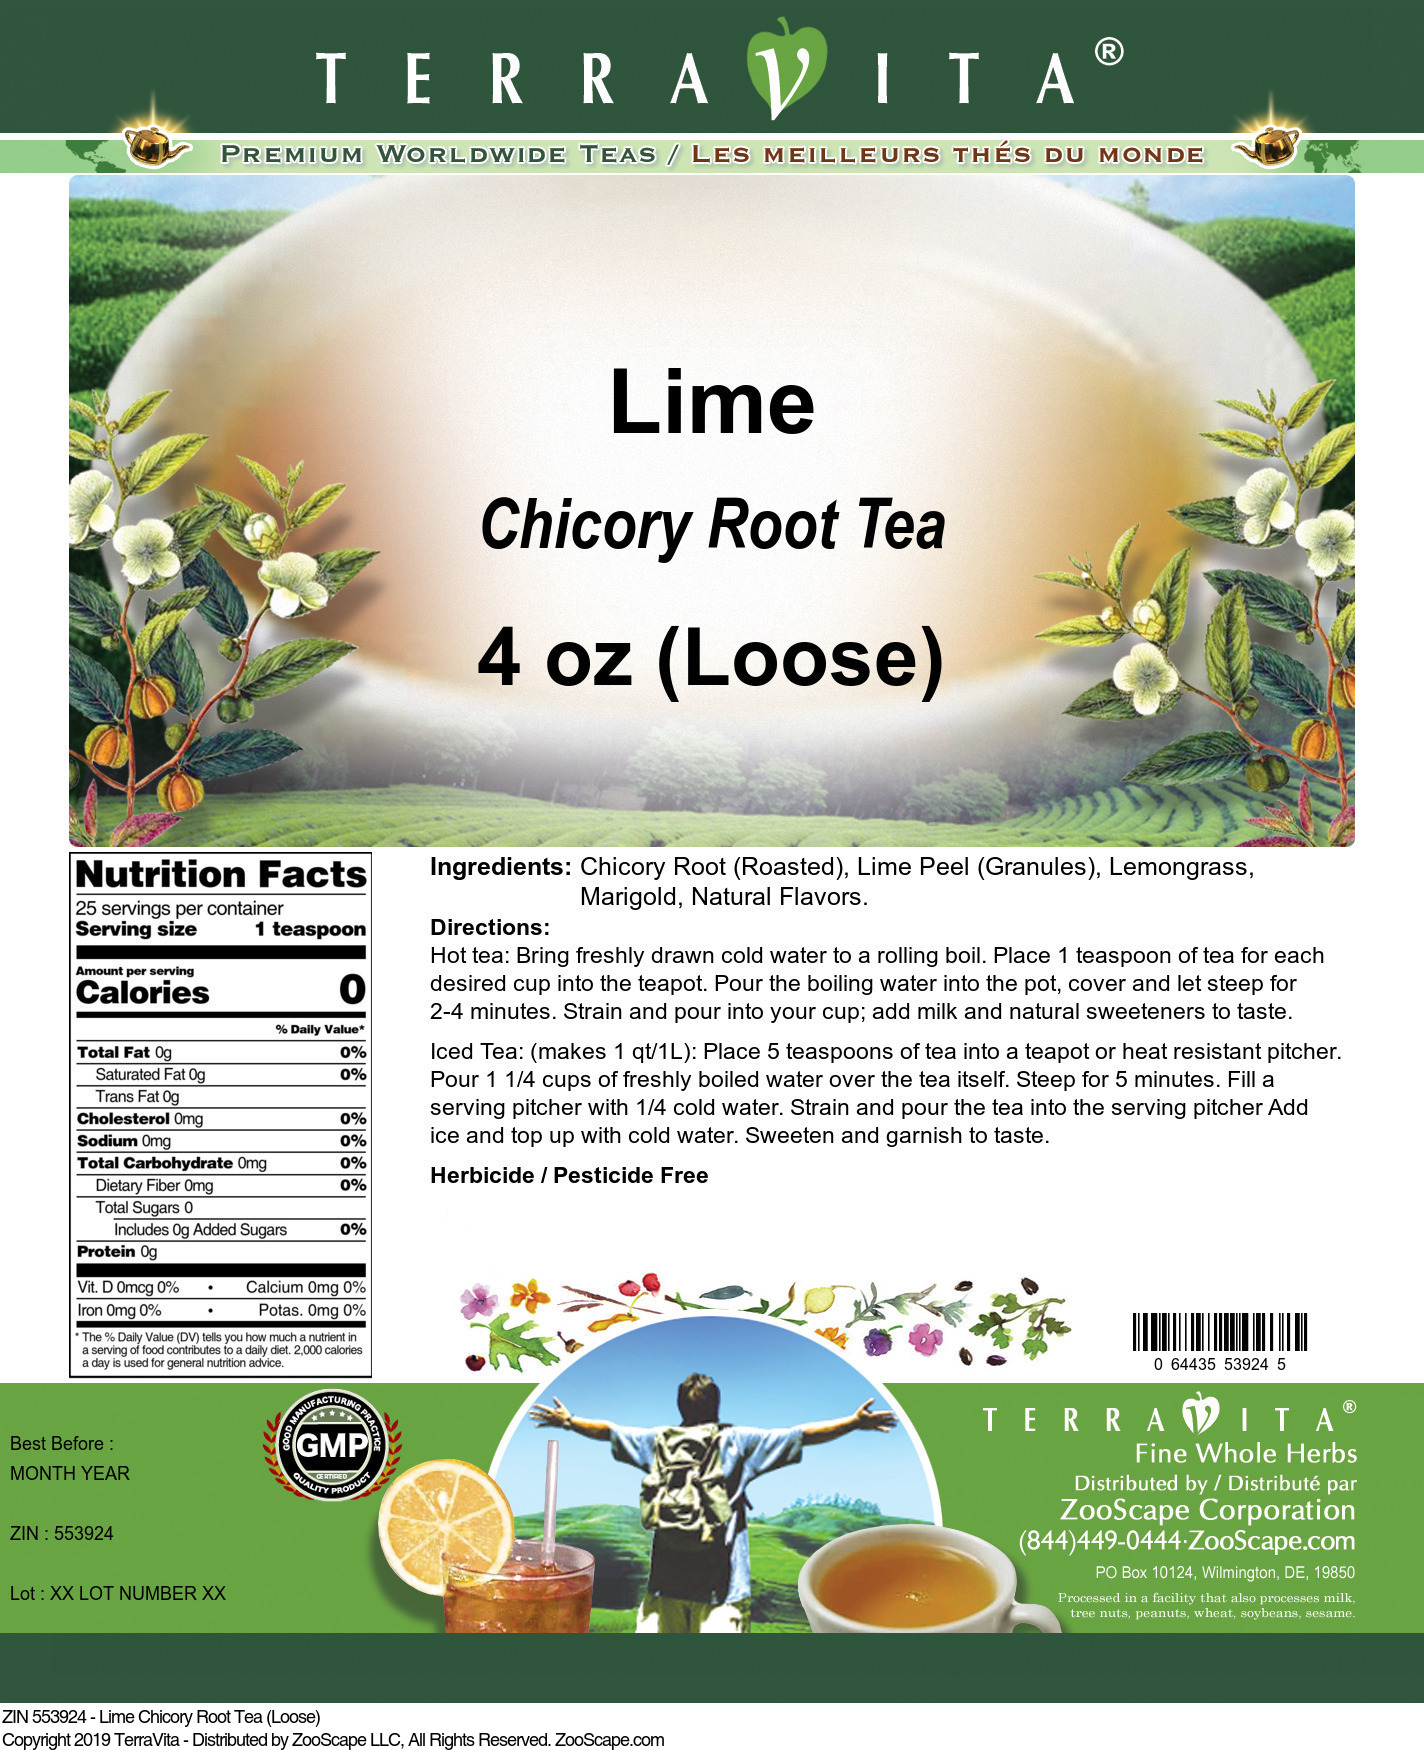 Lime Chicory Root Tea (Loose) - Label